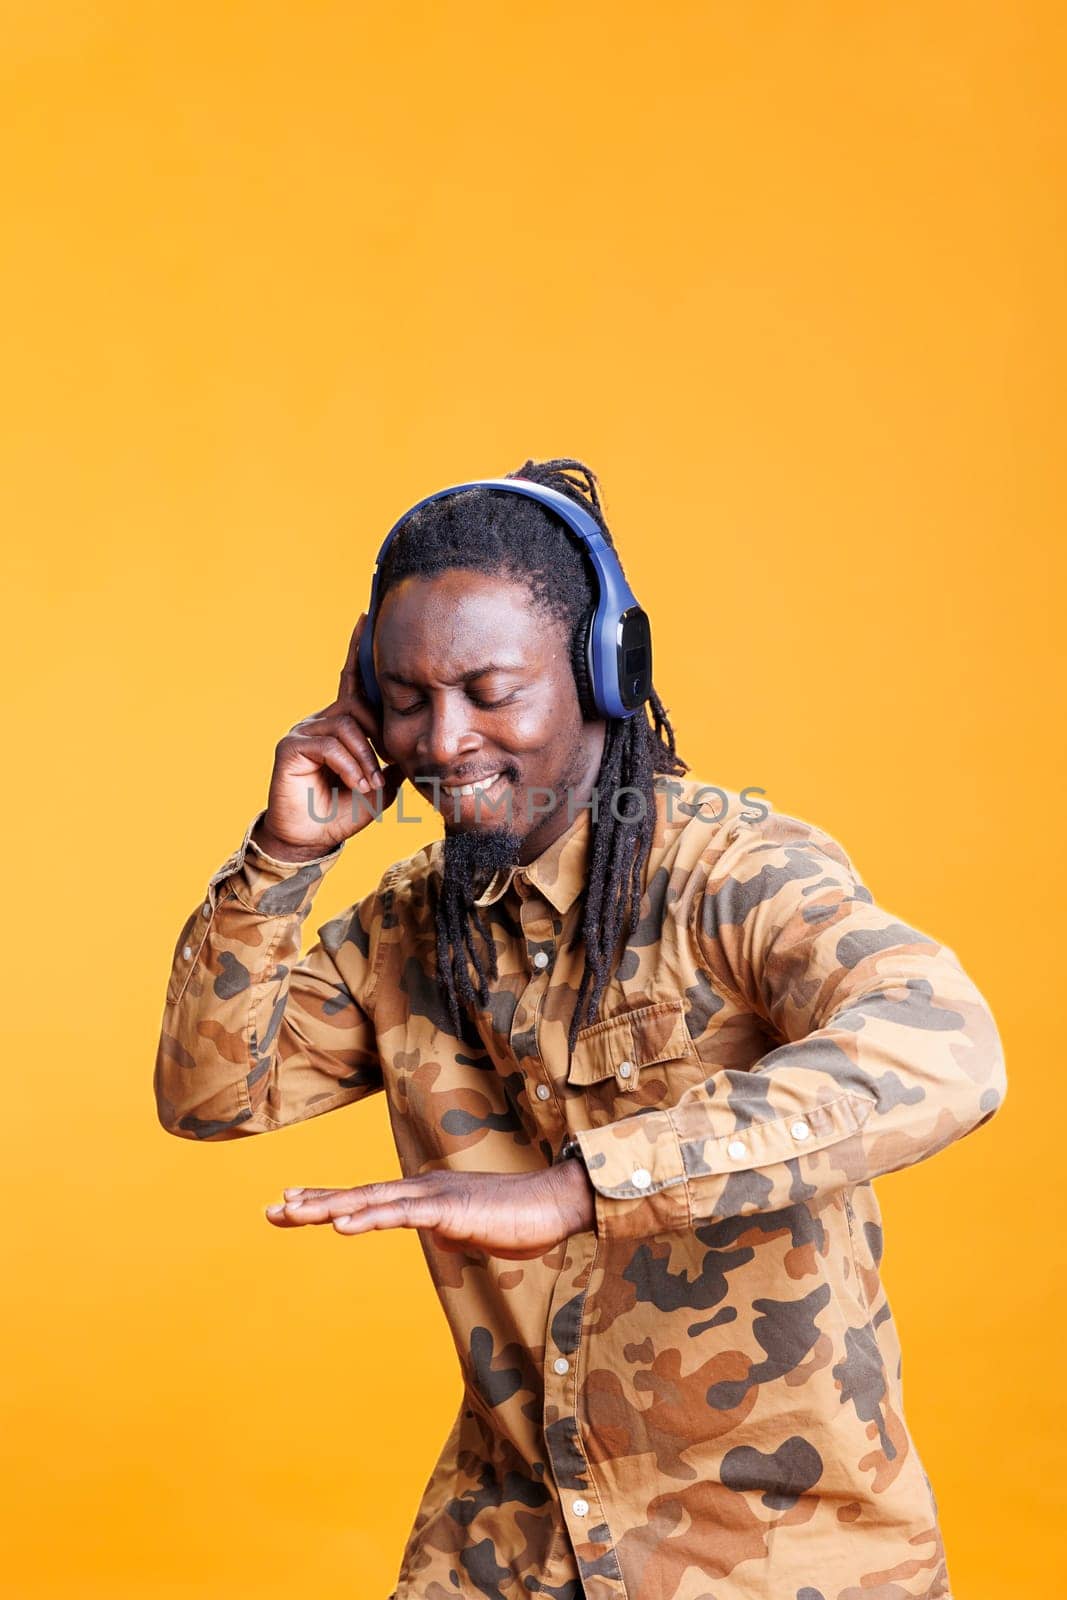 Smiling cheerful man enjoying song on headphones in studio over yellow background, dancing and having fun during leisure time. African american person relaxing and listening to audio on camera